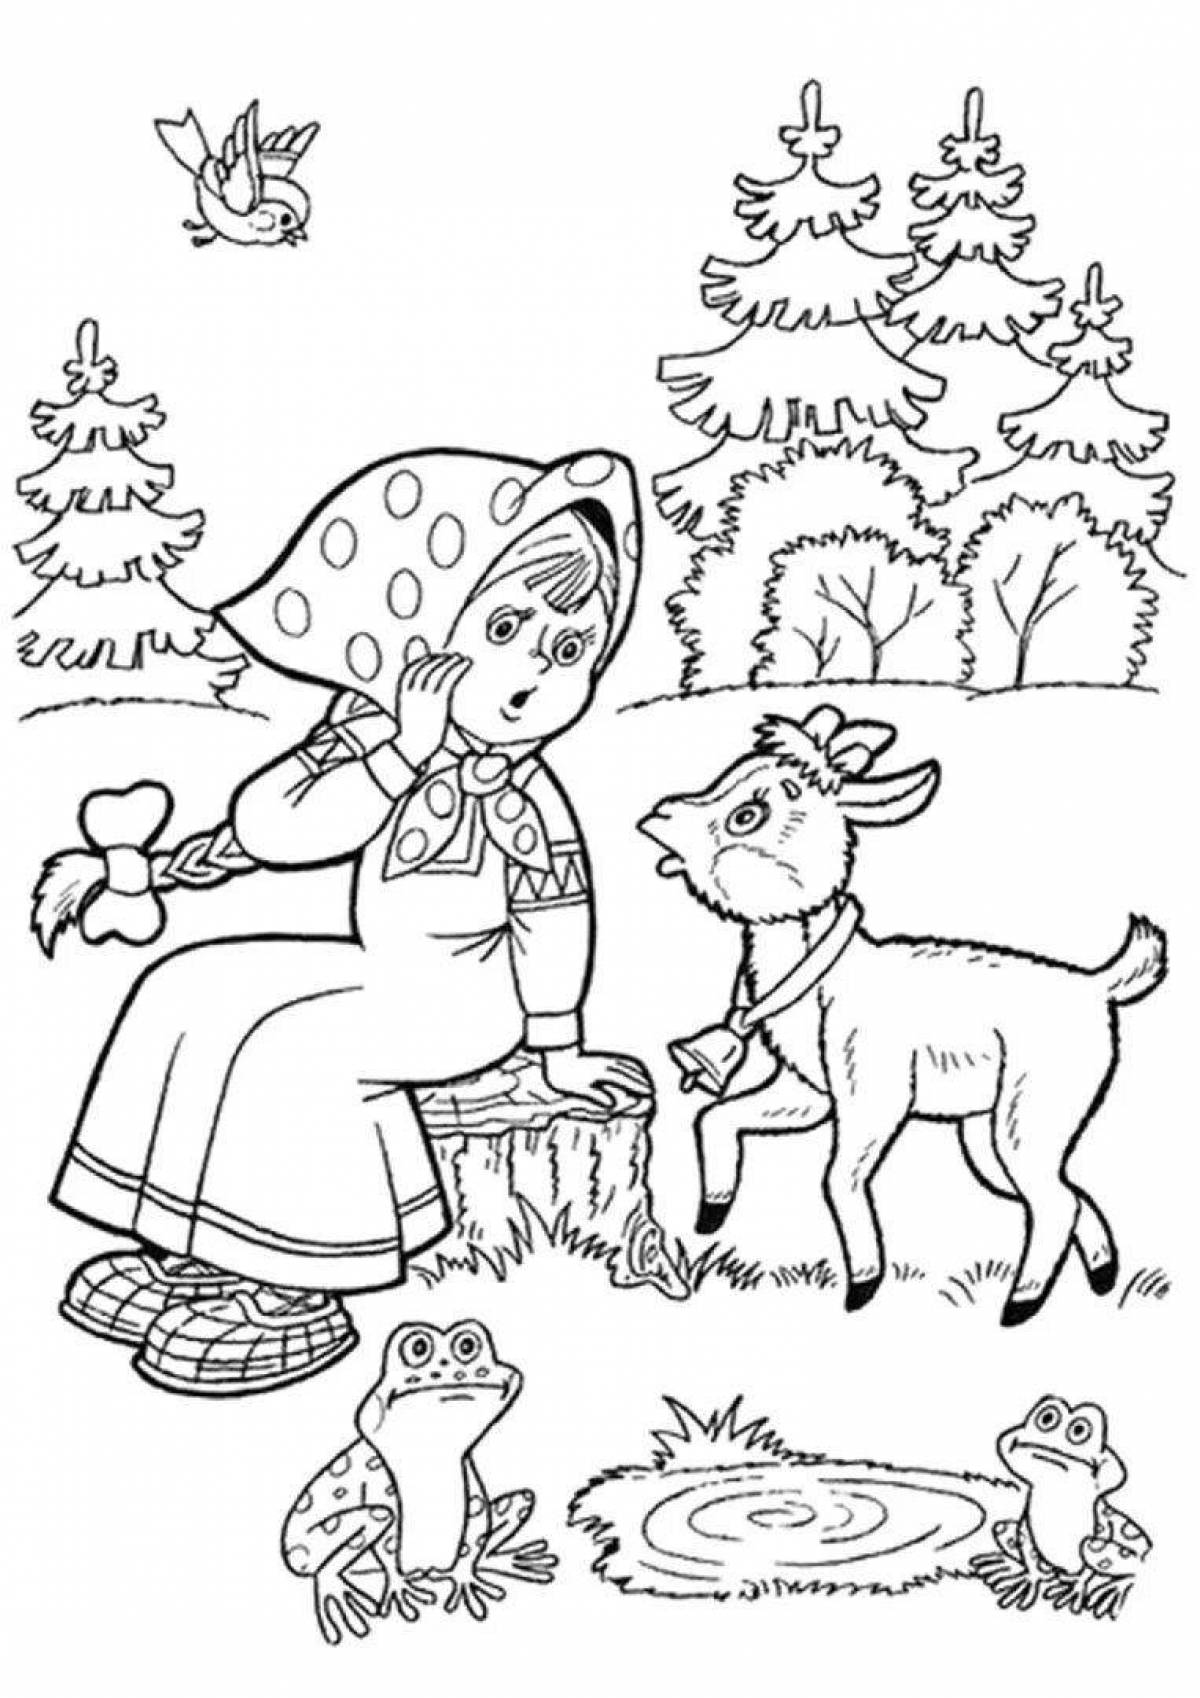 Amazing fairy tale coloring pages for kids